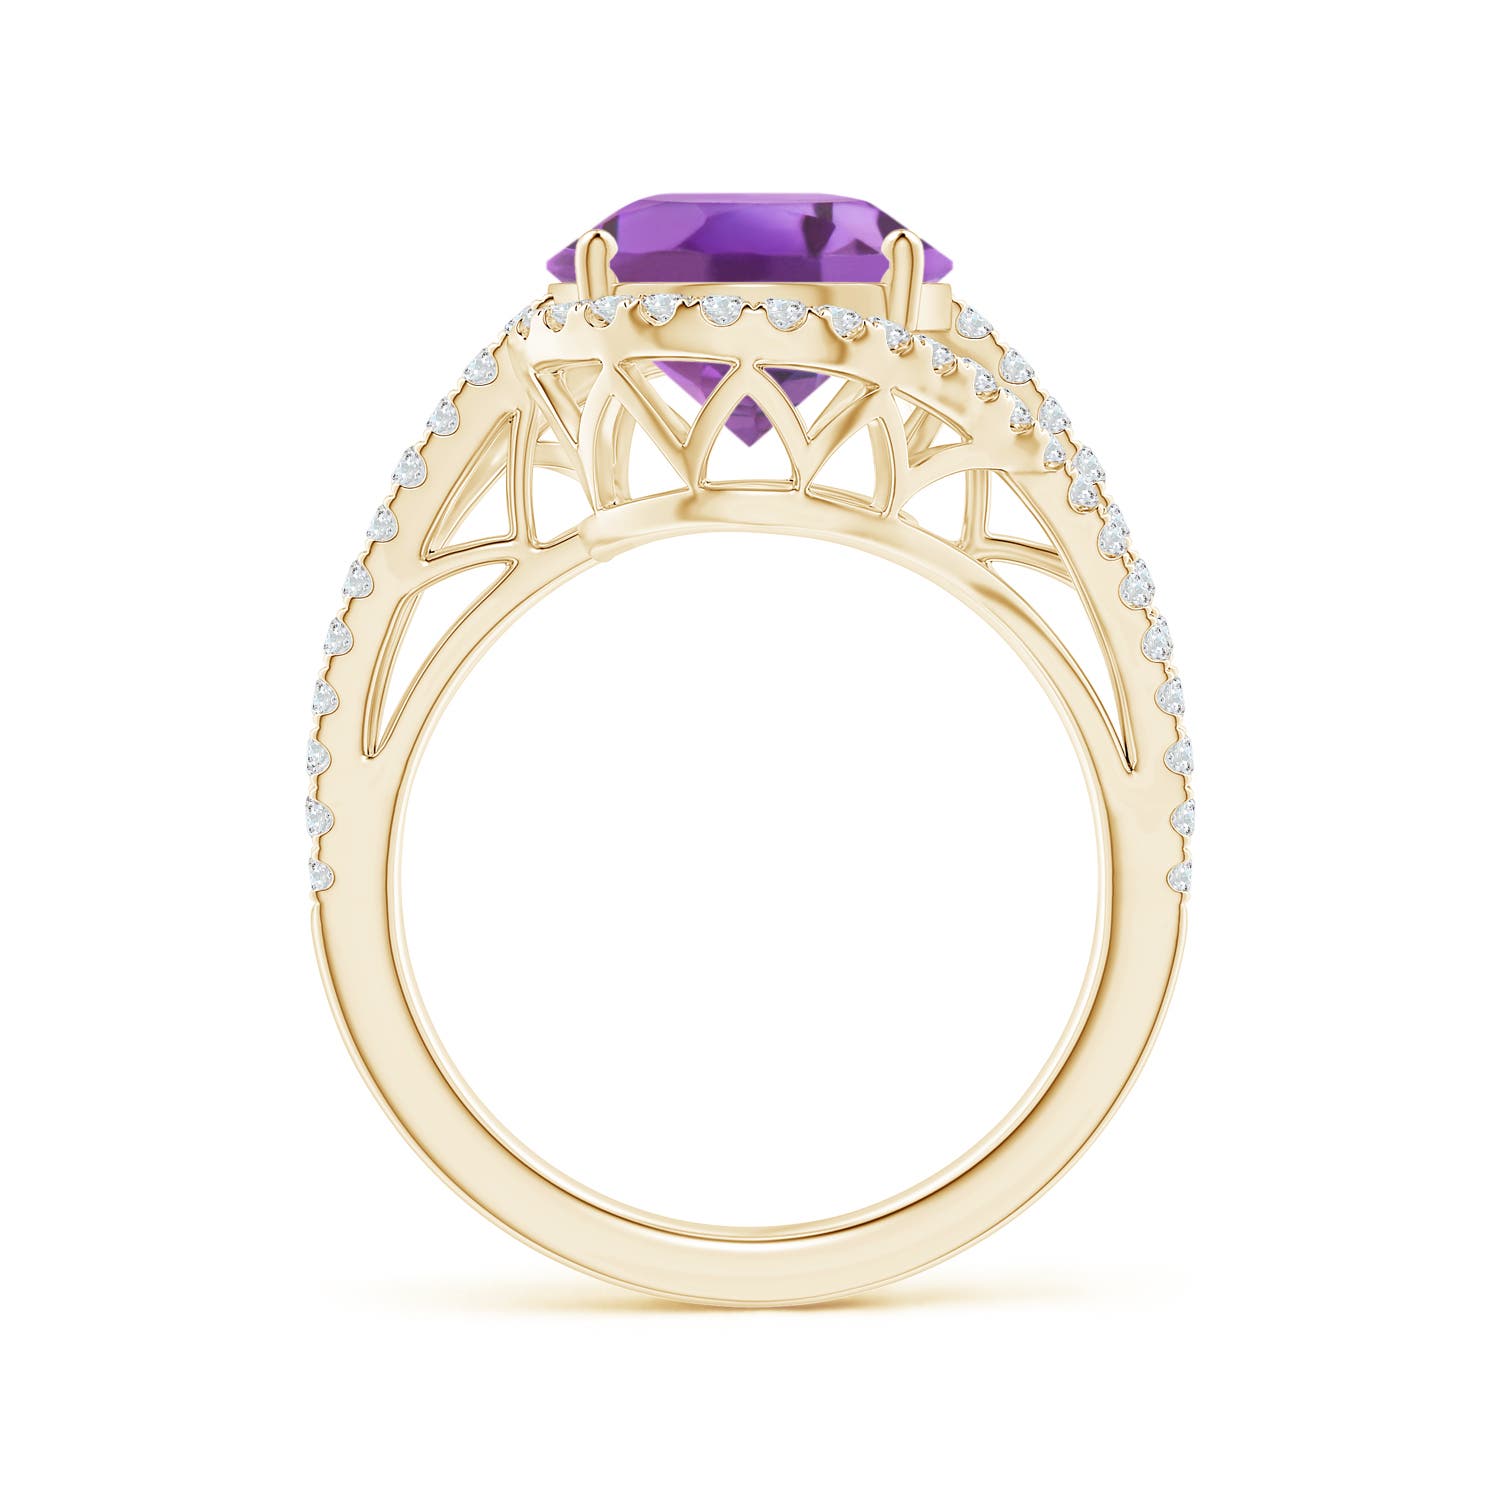 A - Amethyst / 4.92 CT / 14 KT Yellow Gold